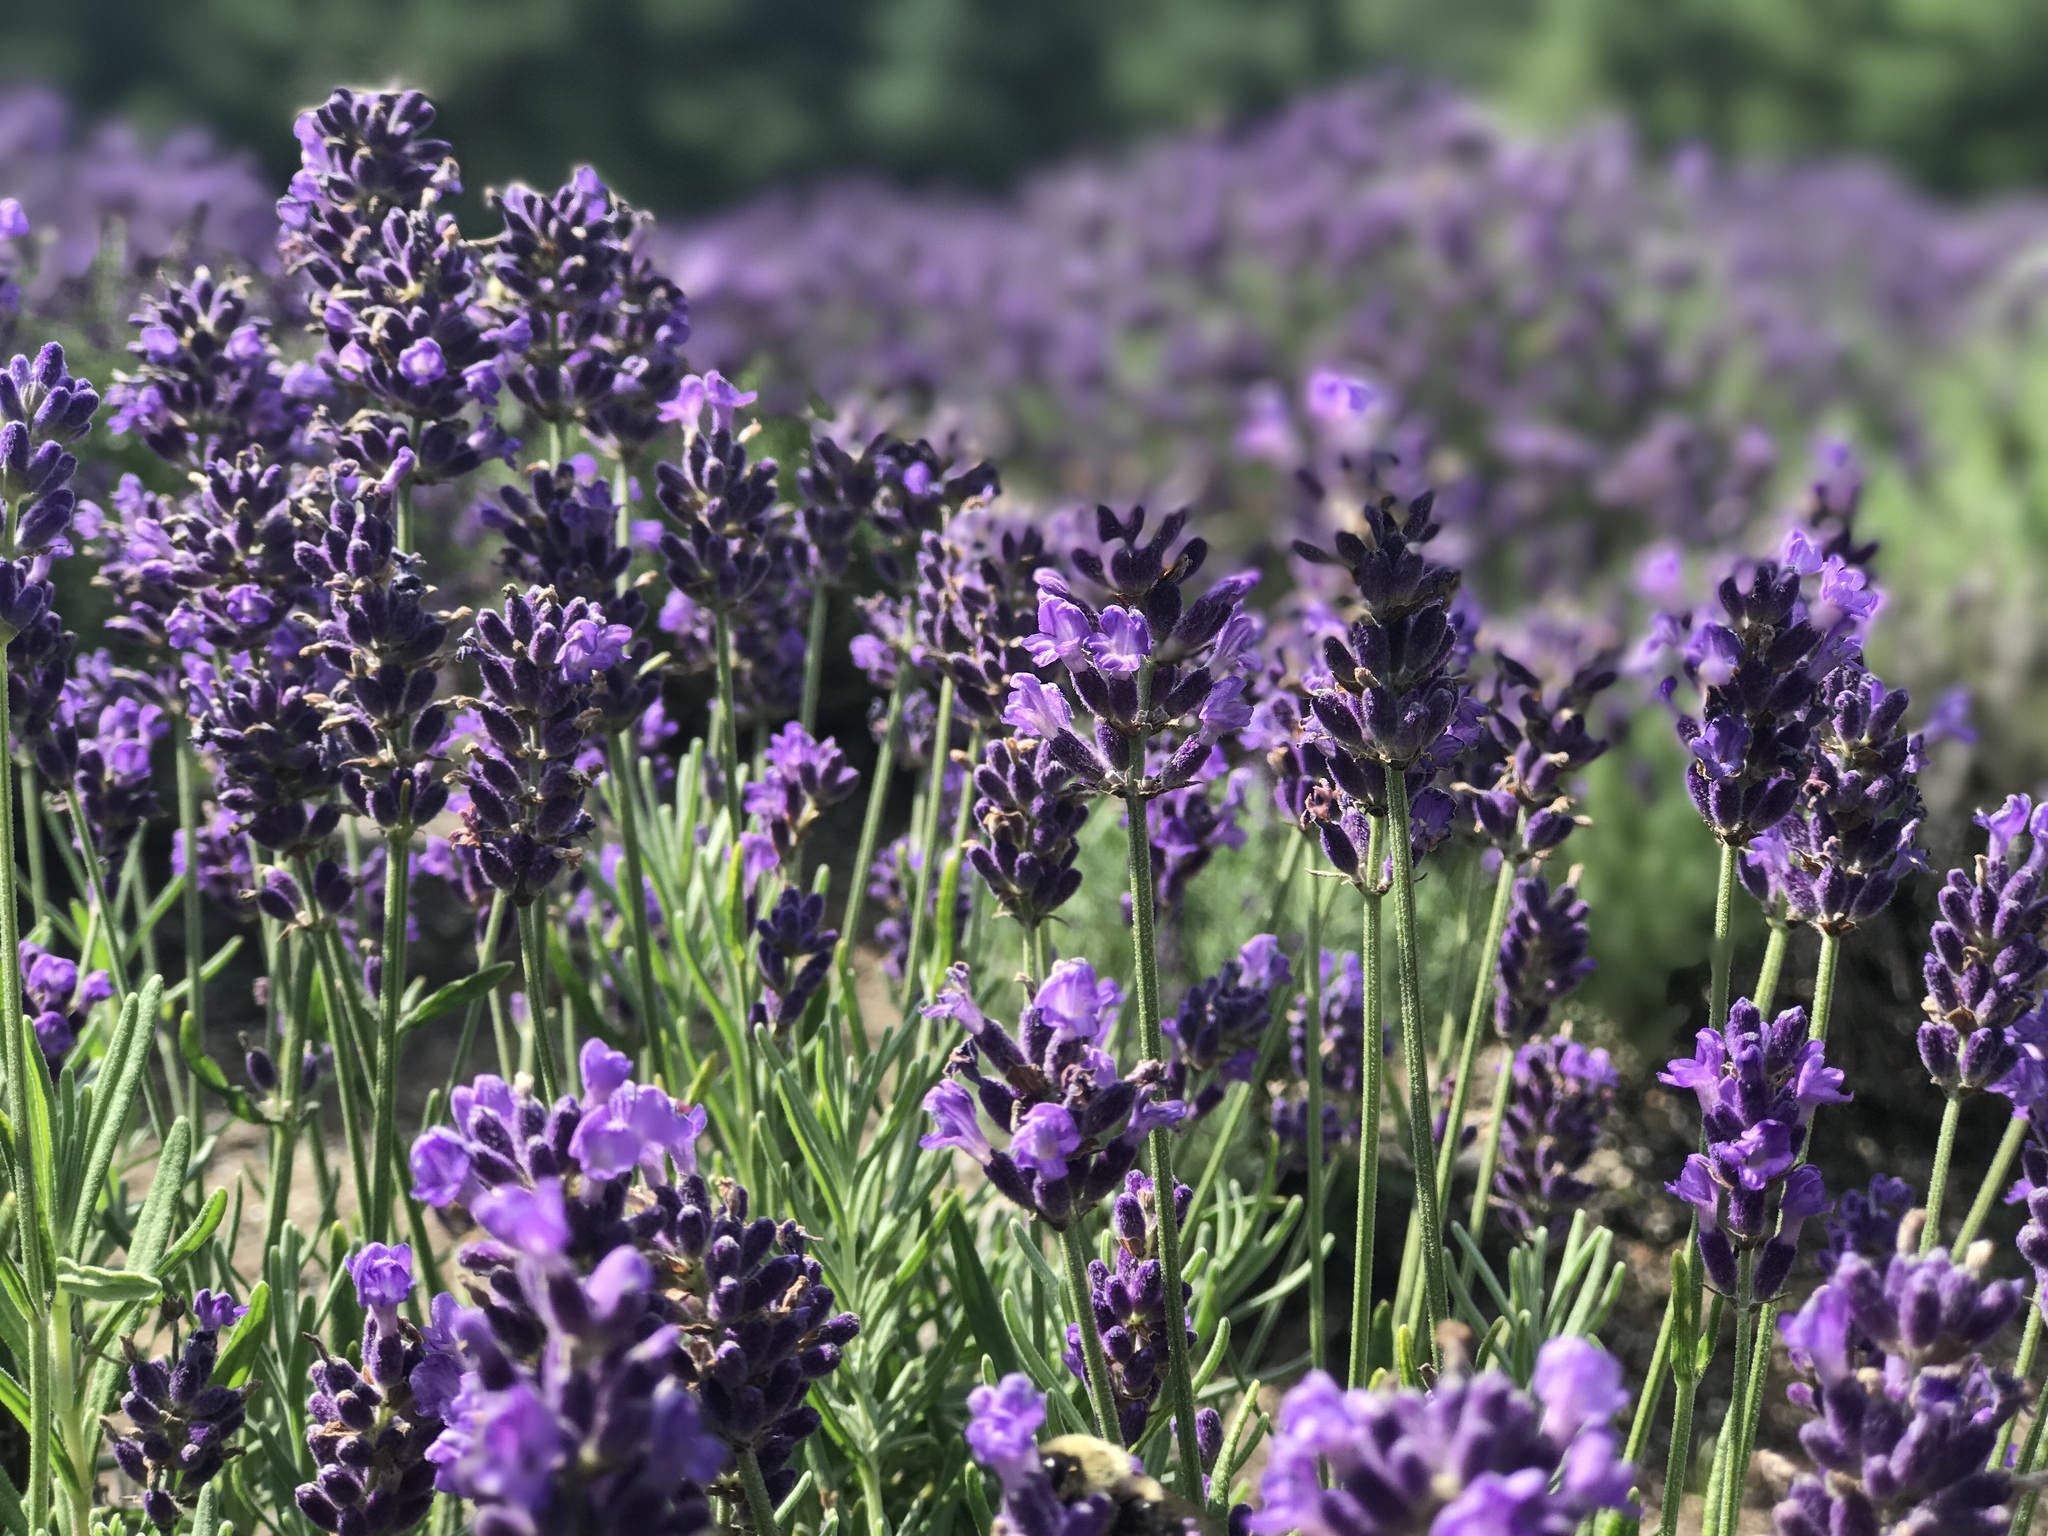 Lavender Herb Production Reducing Poverty in Bulgaria